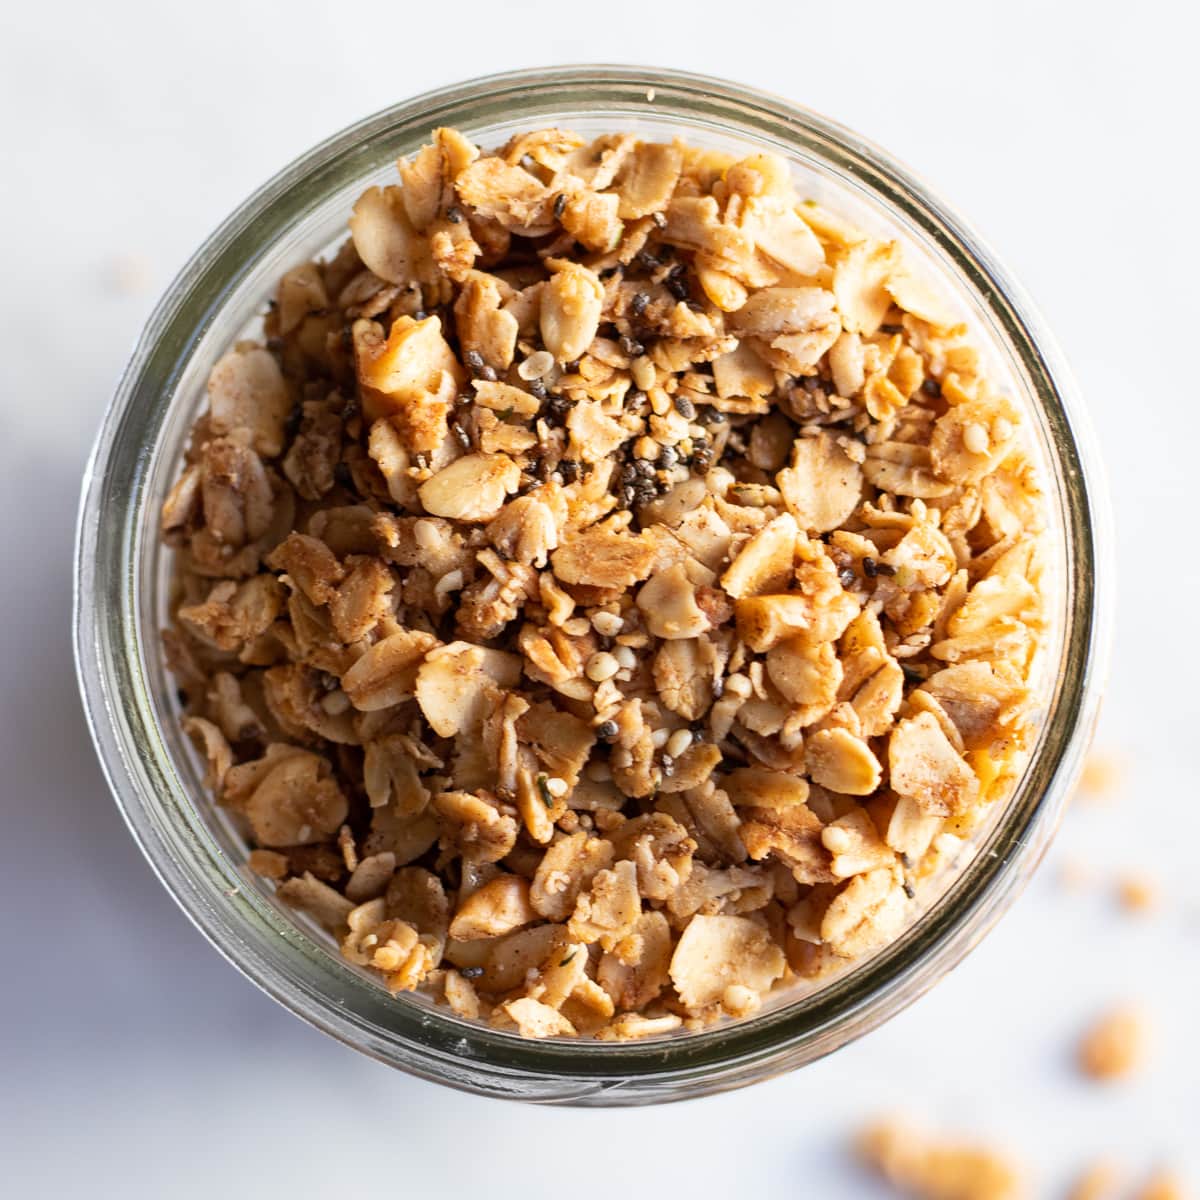 A close up of low FODMAP granola made with oats, walnuts, and optional chia seeds.